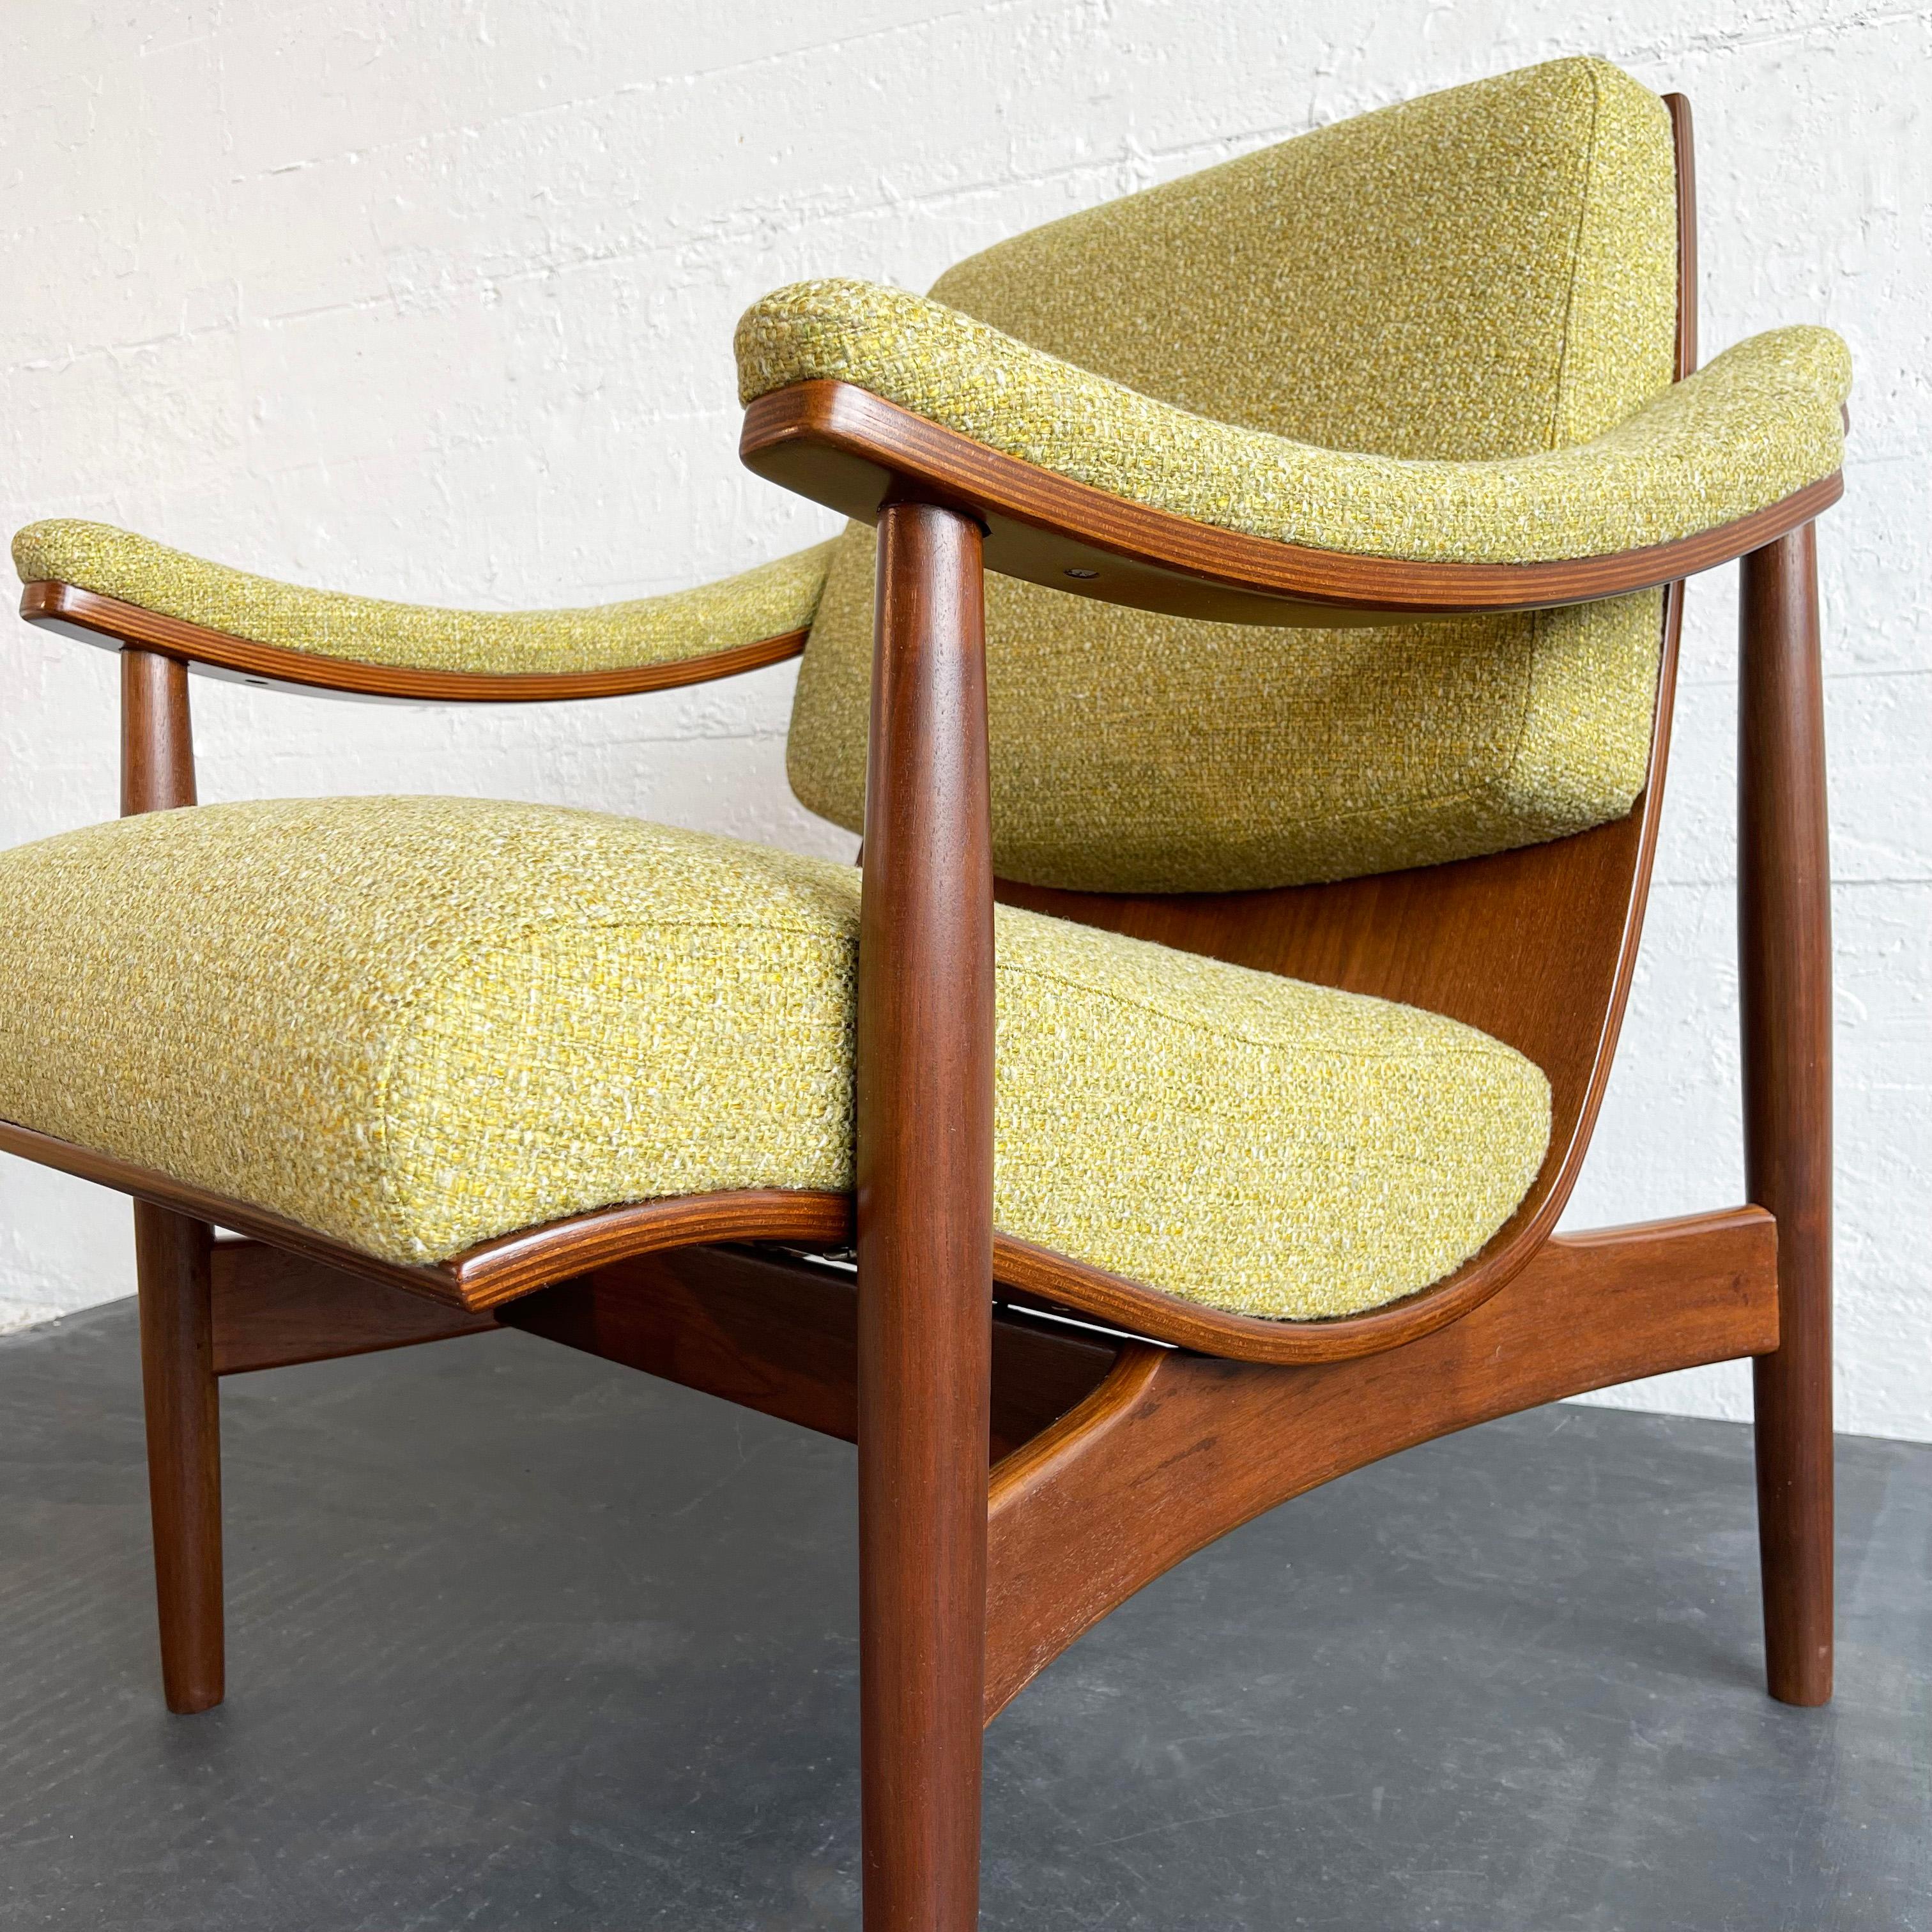 American Mid-Century Modern Upholstered Scoop Bentwood Armchair By Thonet For Sale